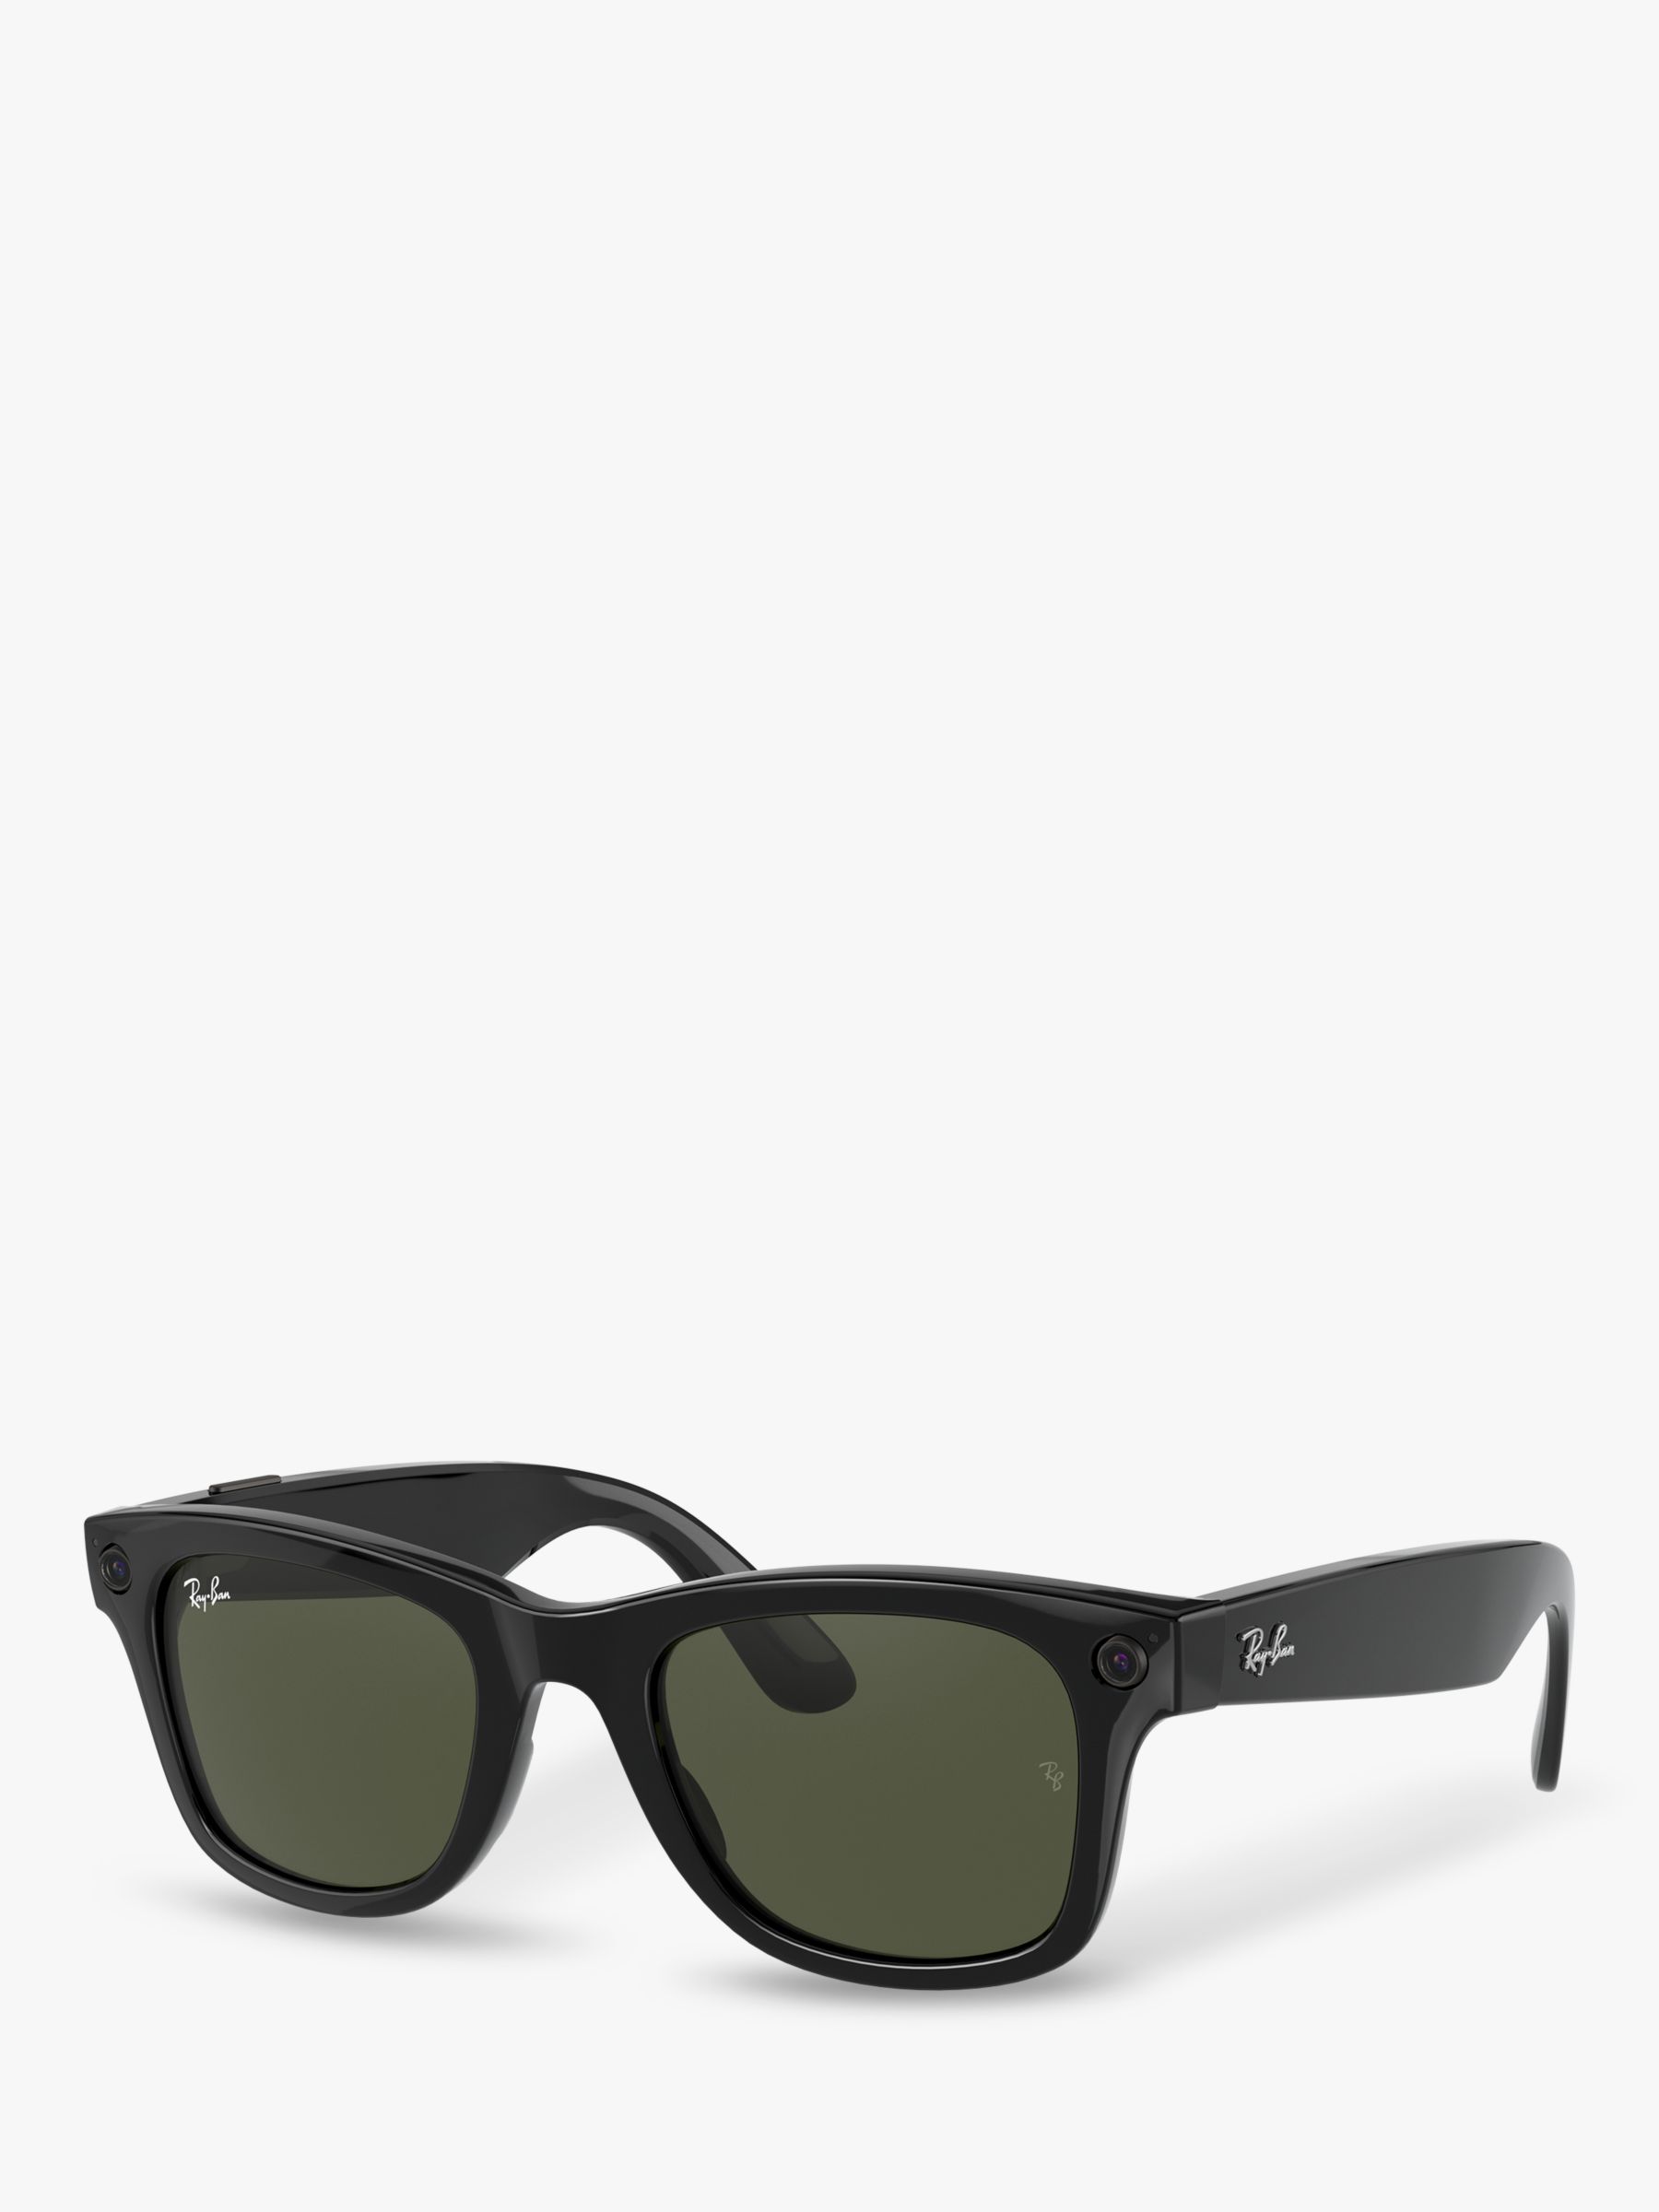 review of rayban stories